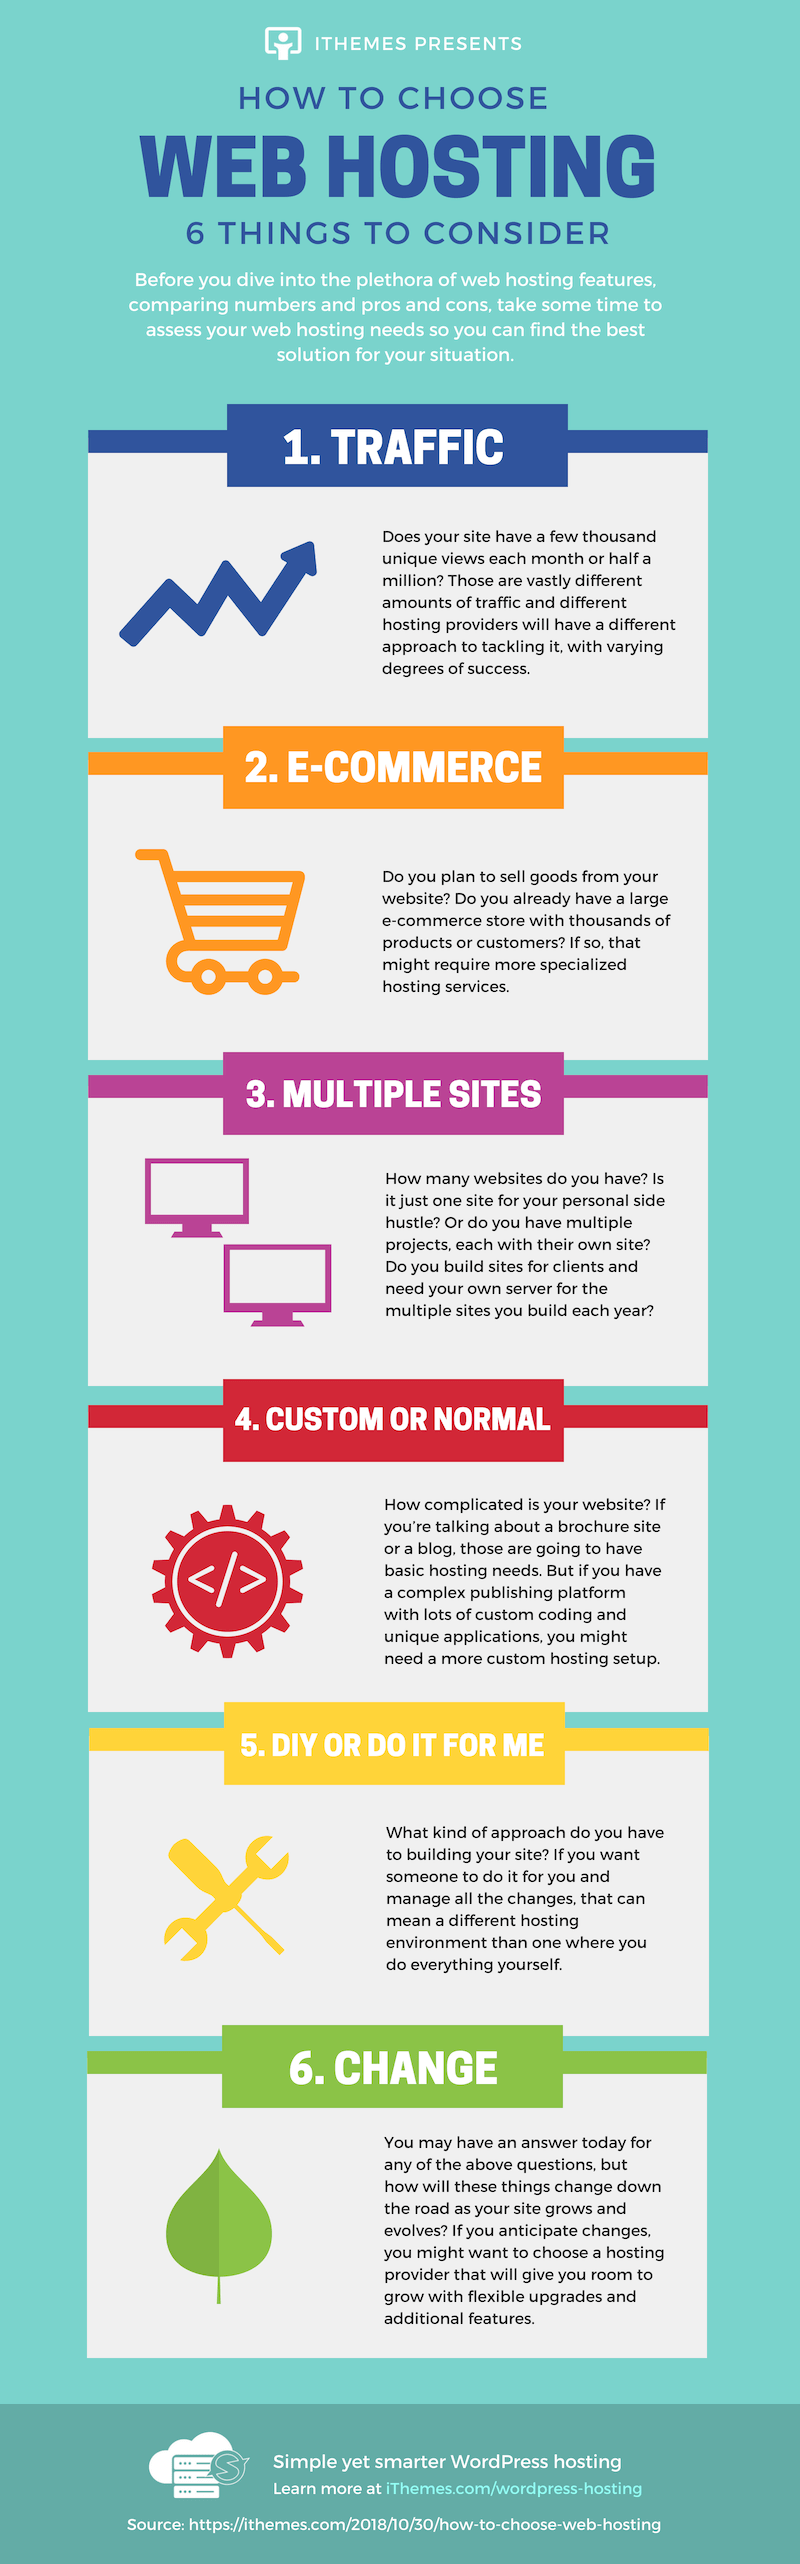 how to choose web hosting